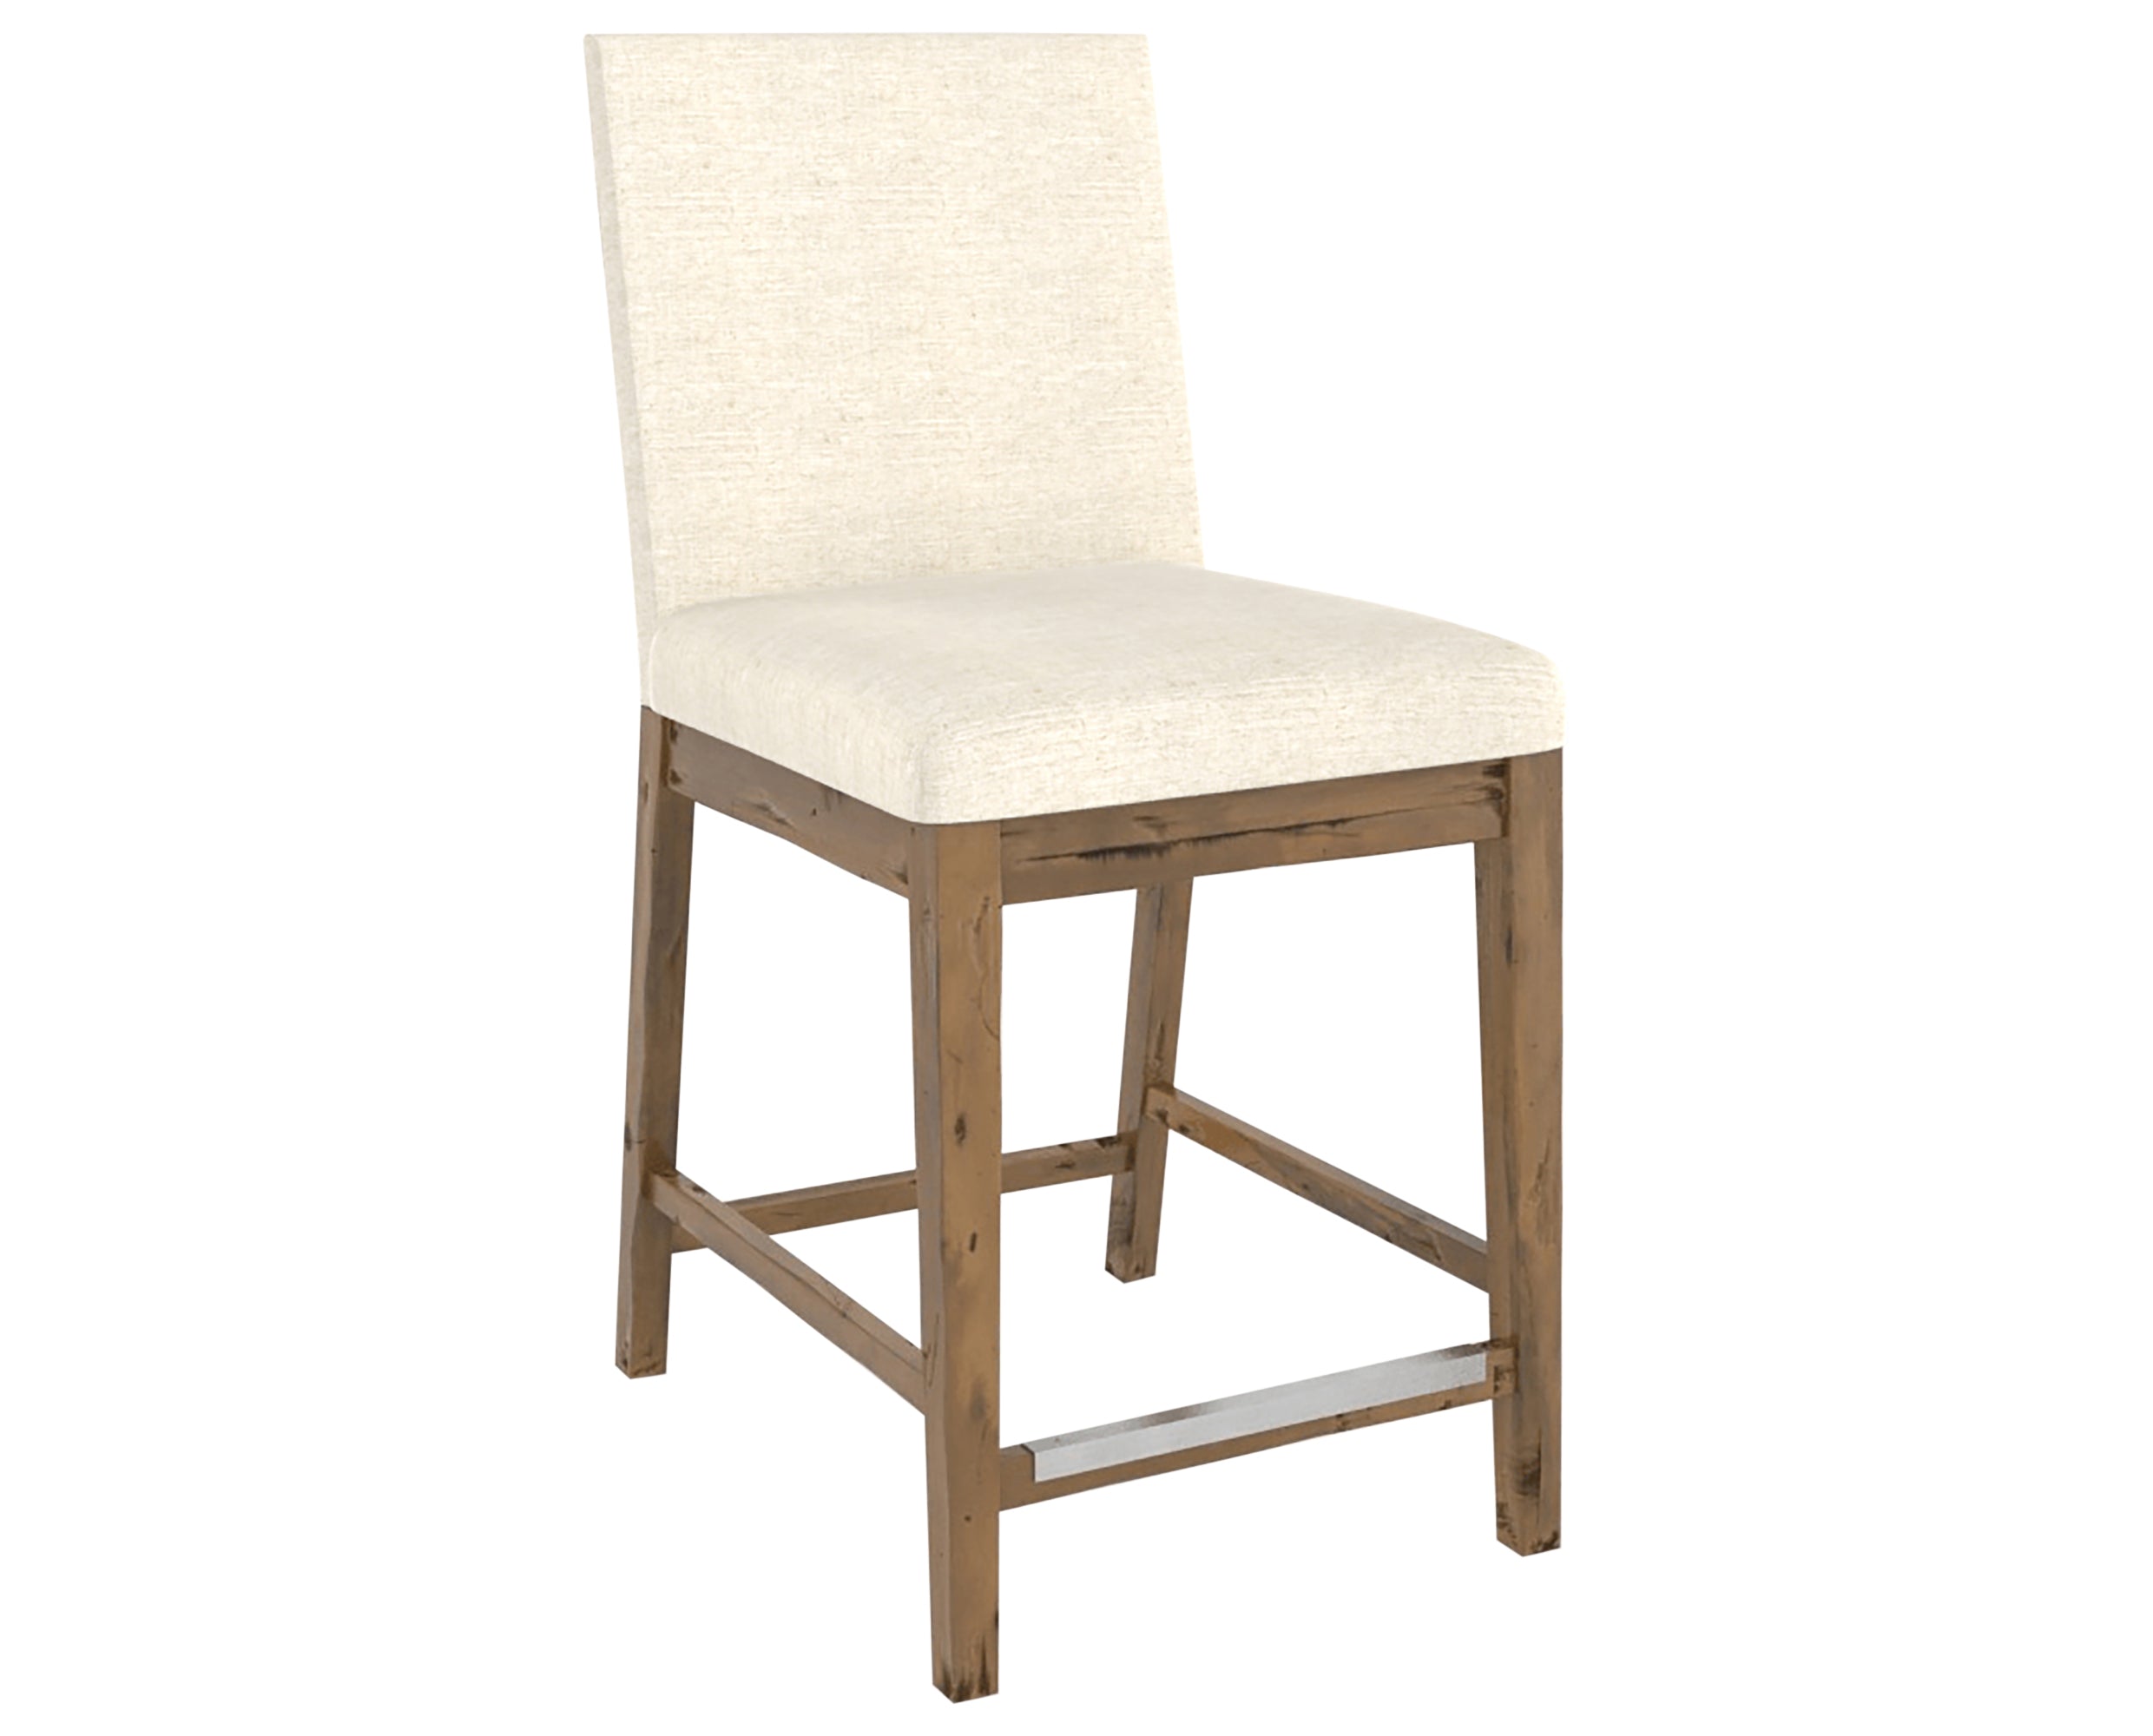 Oak Washed &amp; Fabric TW | Canadel Champlain Counter Stool 8002 | Valley Ridge Furniture